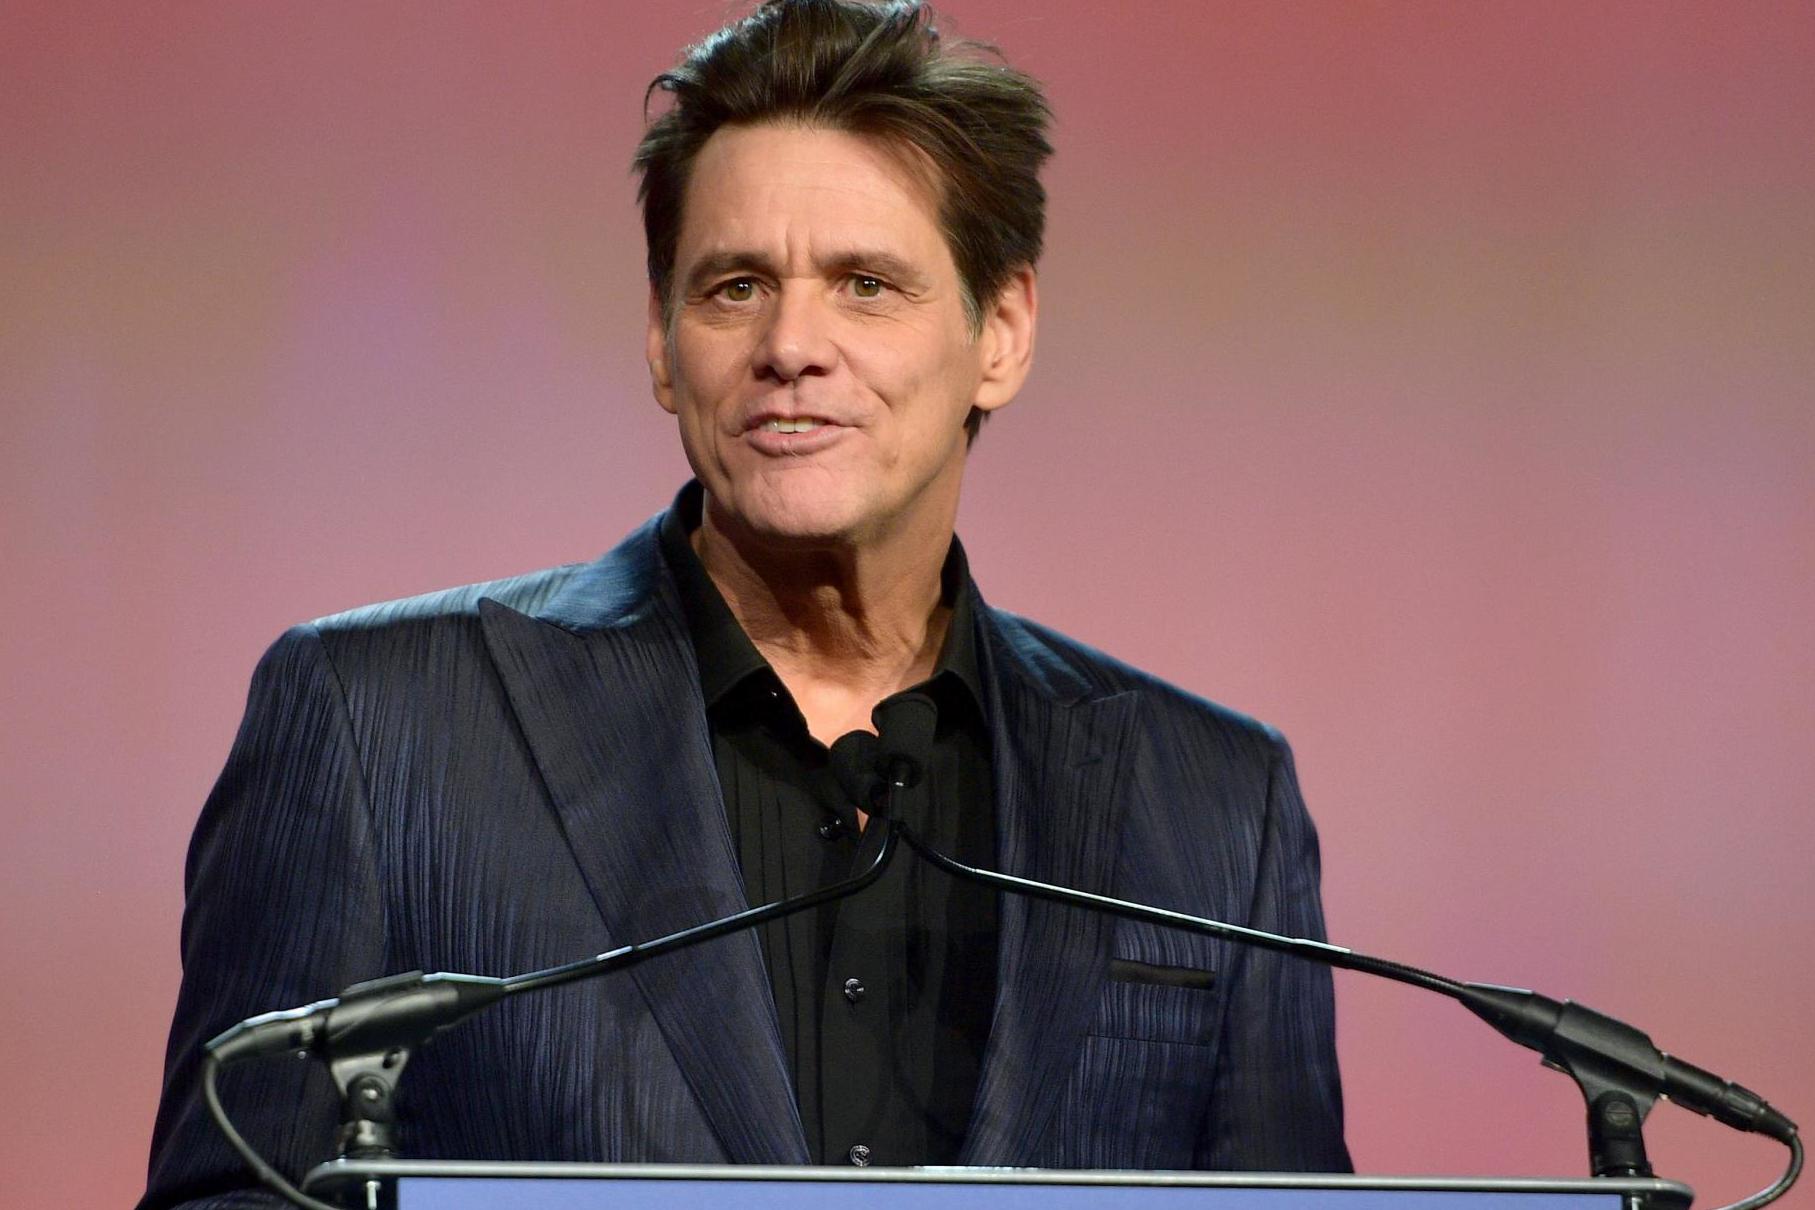 Jim Carrey presents the Vanguard Award onstage at the 30th Annual Palm Springs International Film Festival Film Awards Gala at Palm Springs Convention Center on 3 January, 2019 in Palm Springs, California.